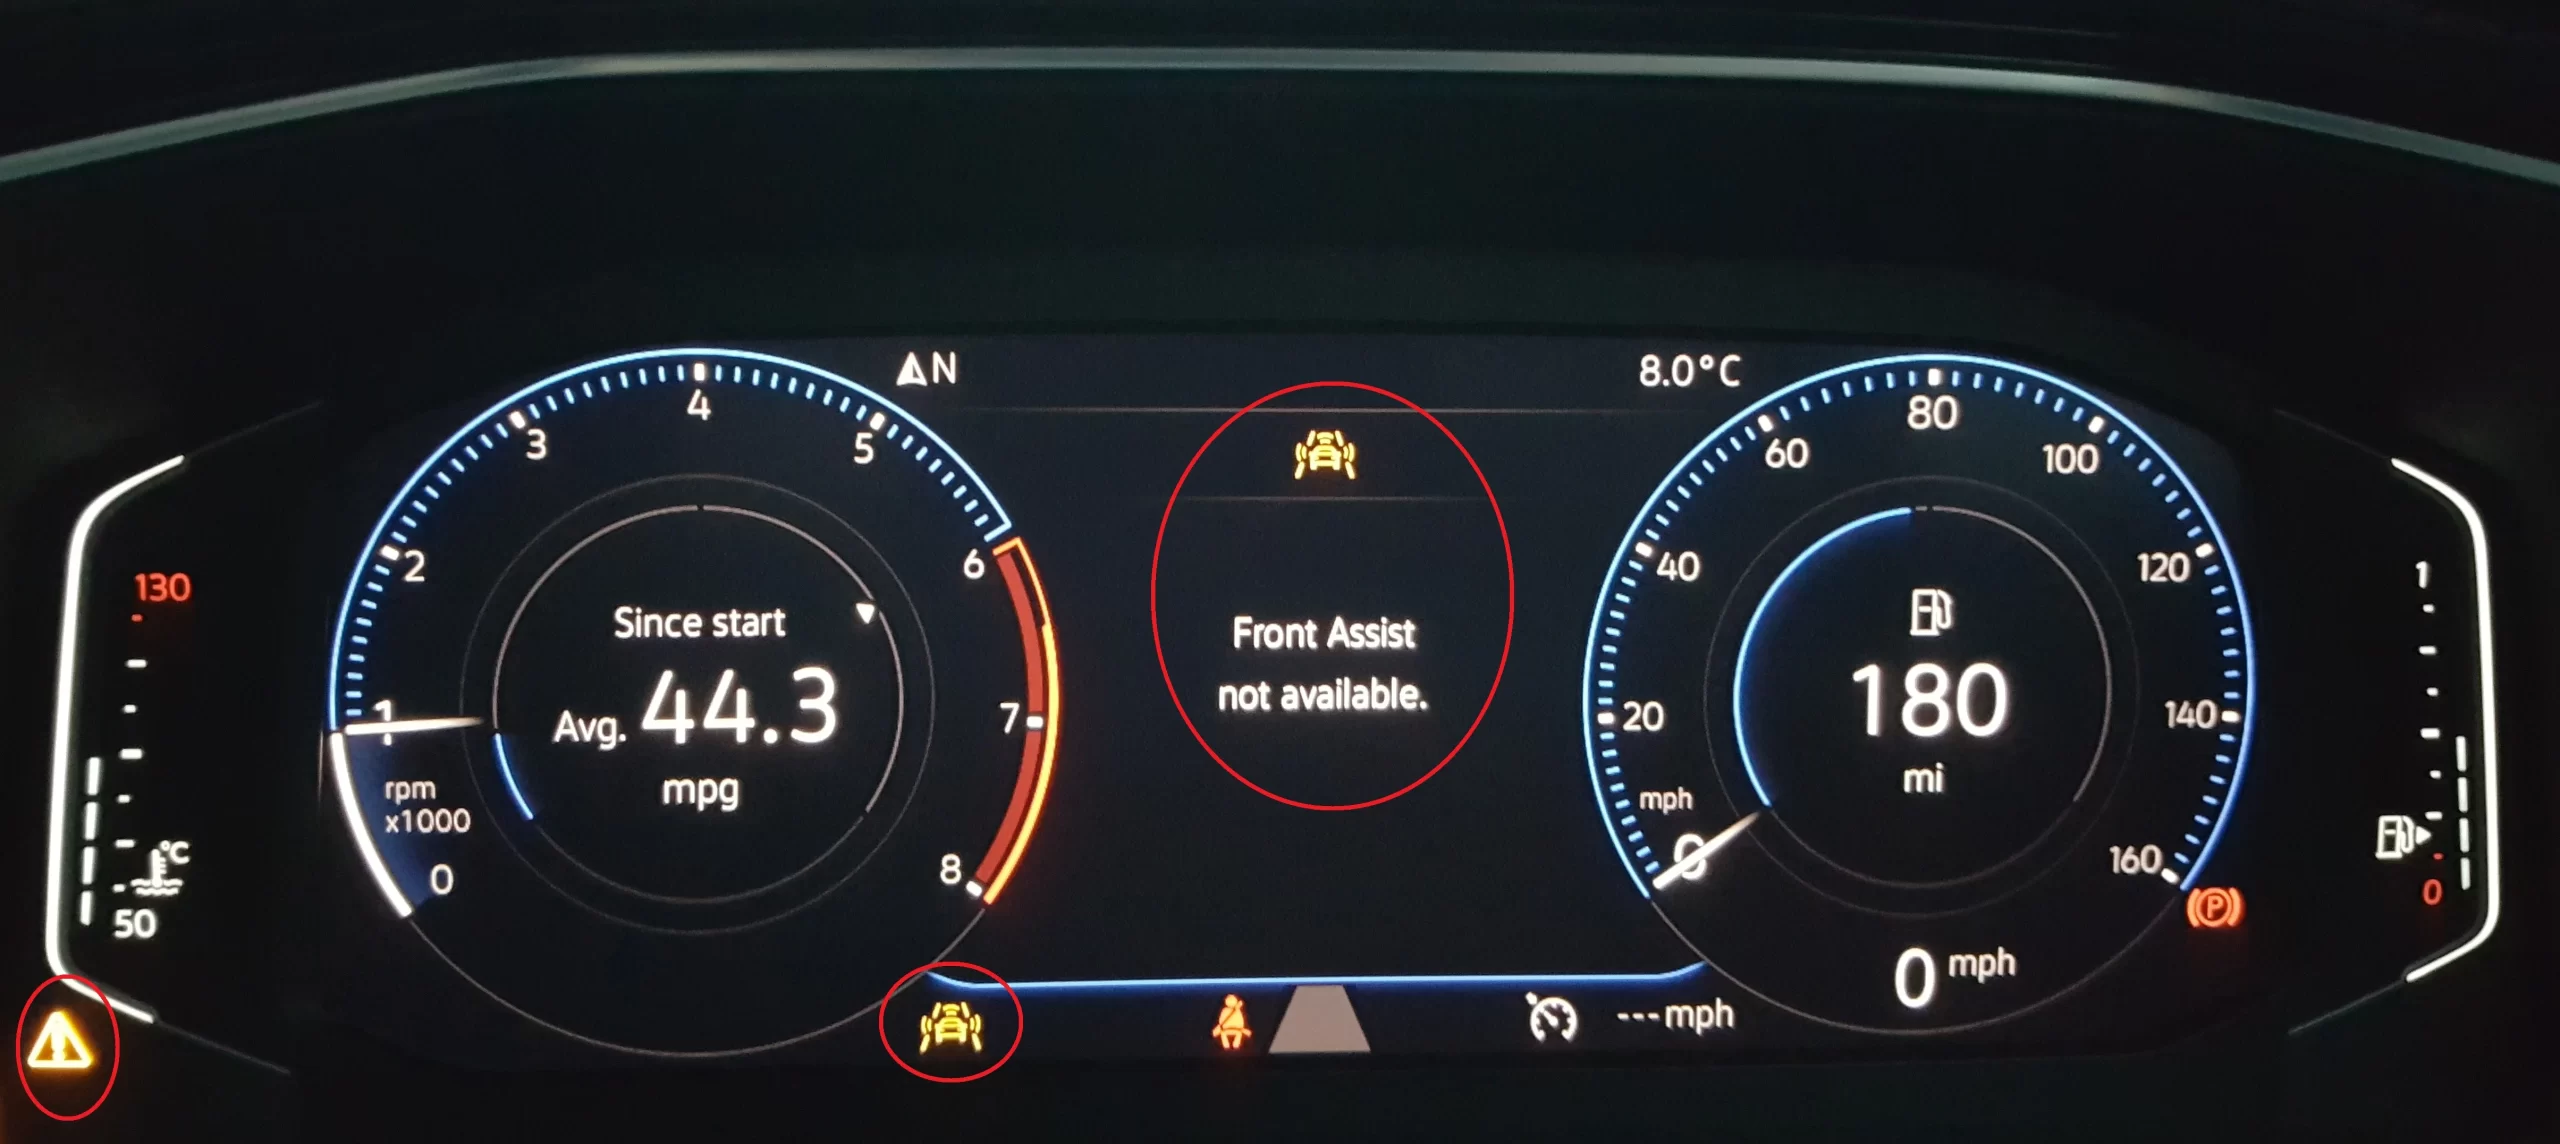 What Are The Reasons Why Front Assist Not Available In My Car?